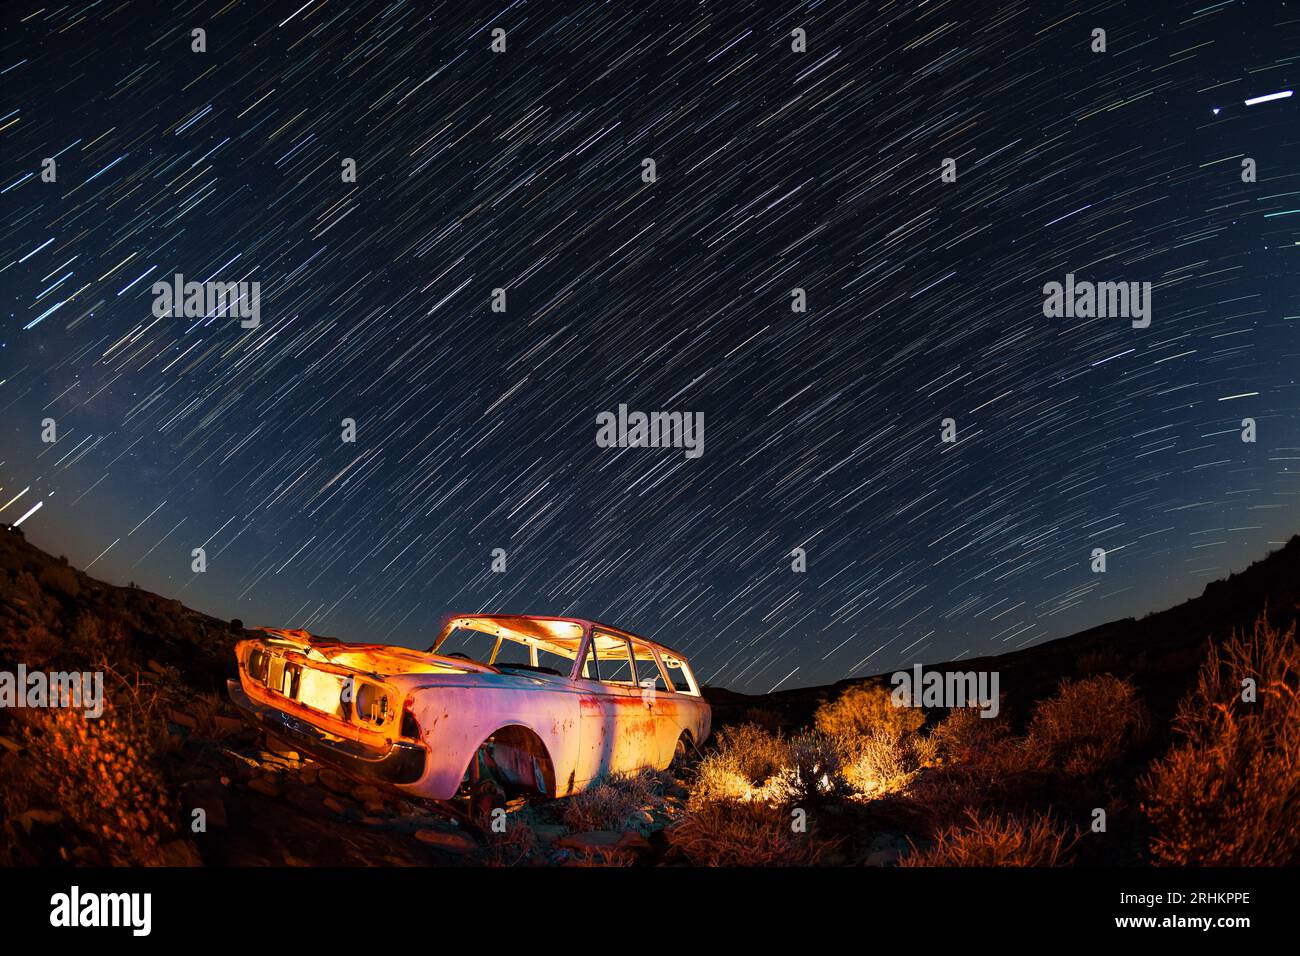 Night photograph of illuminated old car wreck in foreground with a sky filled with star trails photography techniques in Karoo, South Africa Stock Photo